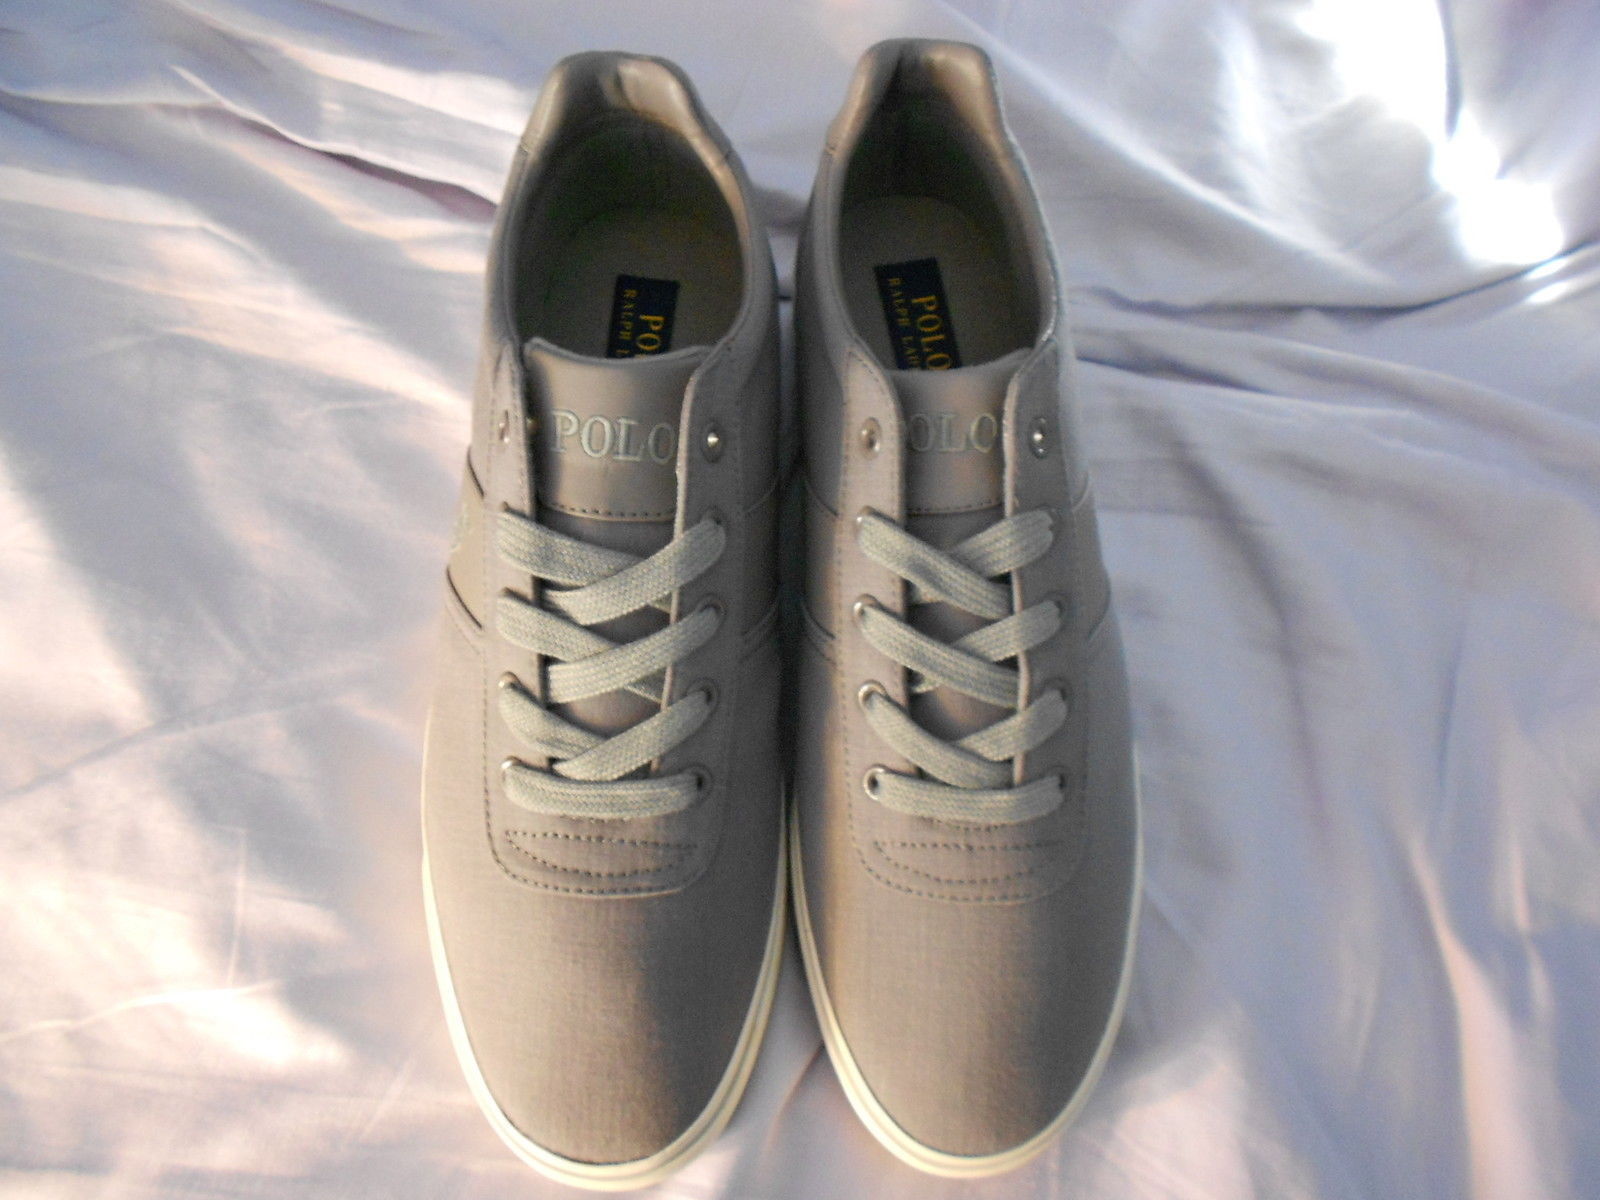 Primary image for Polo Ralph Lauren Grey Sneakers(Heather Ripstop)  Size: 11.5D  New in box